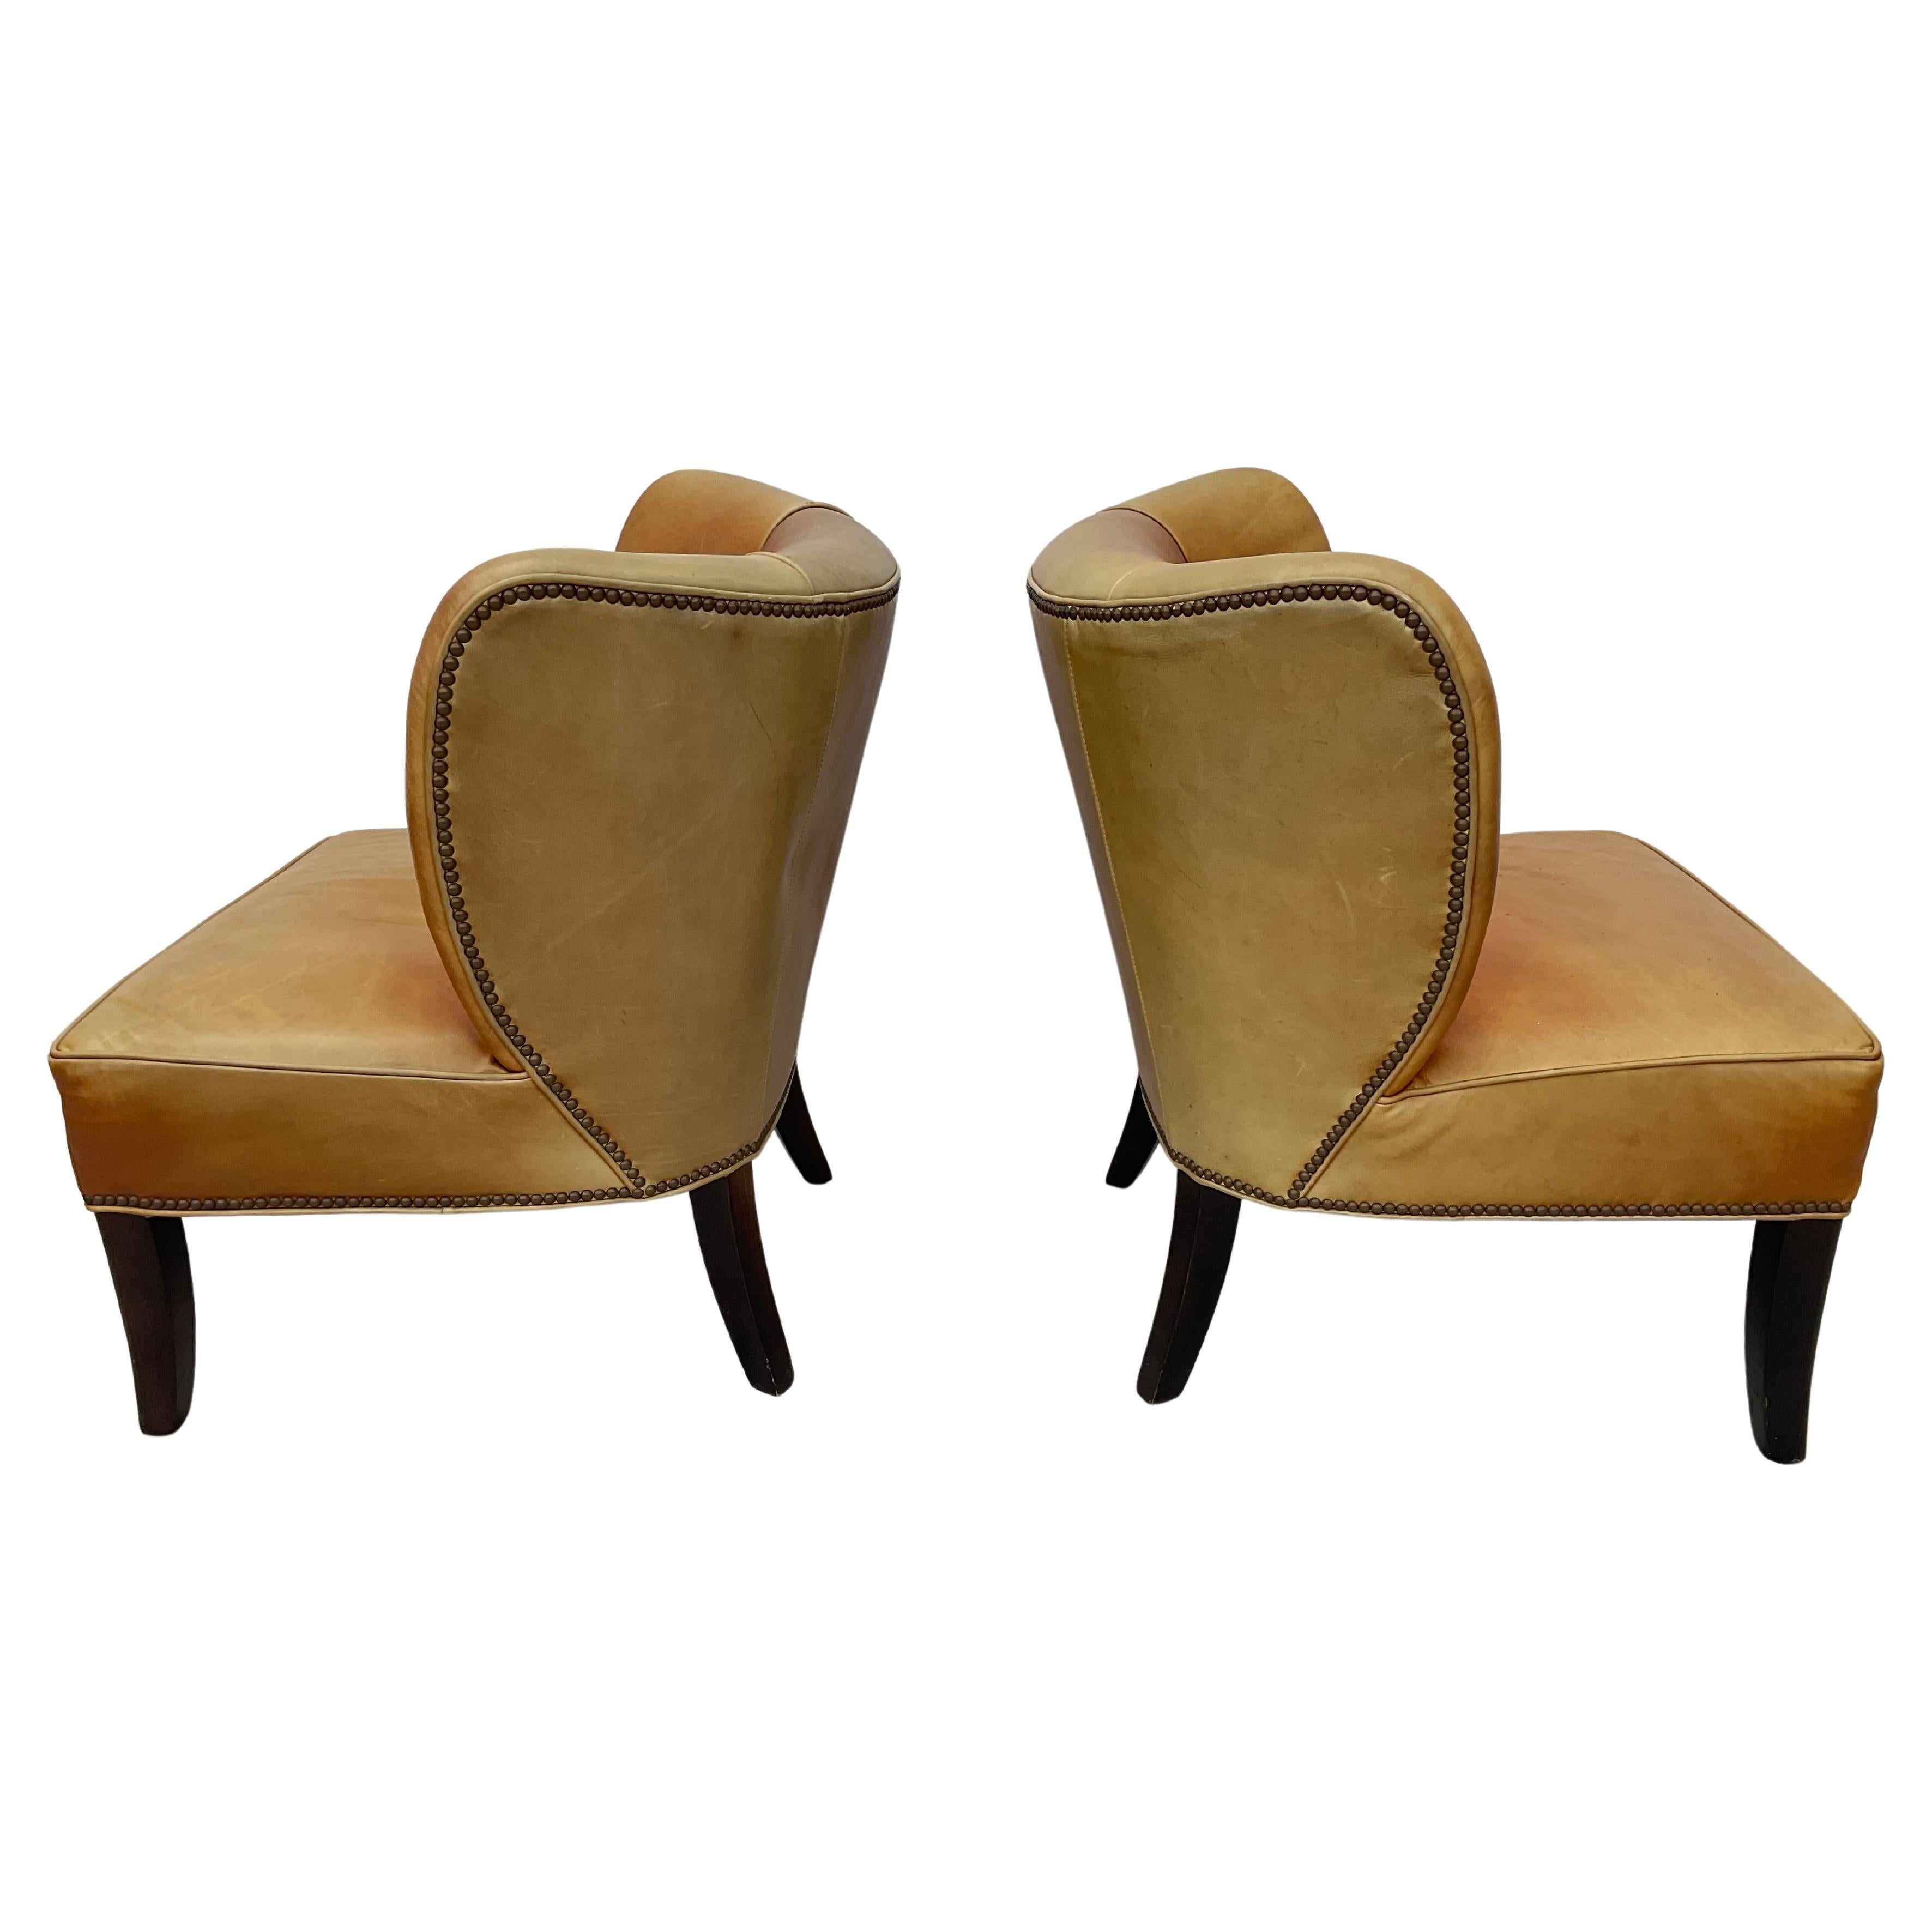 Contemporary Pair Of Arhaus Italian Leather Lounge Chairs For Sale